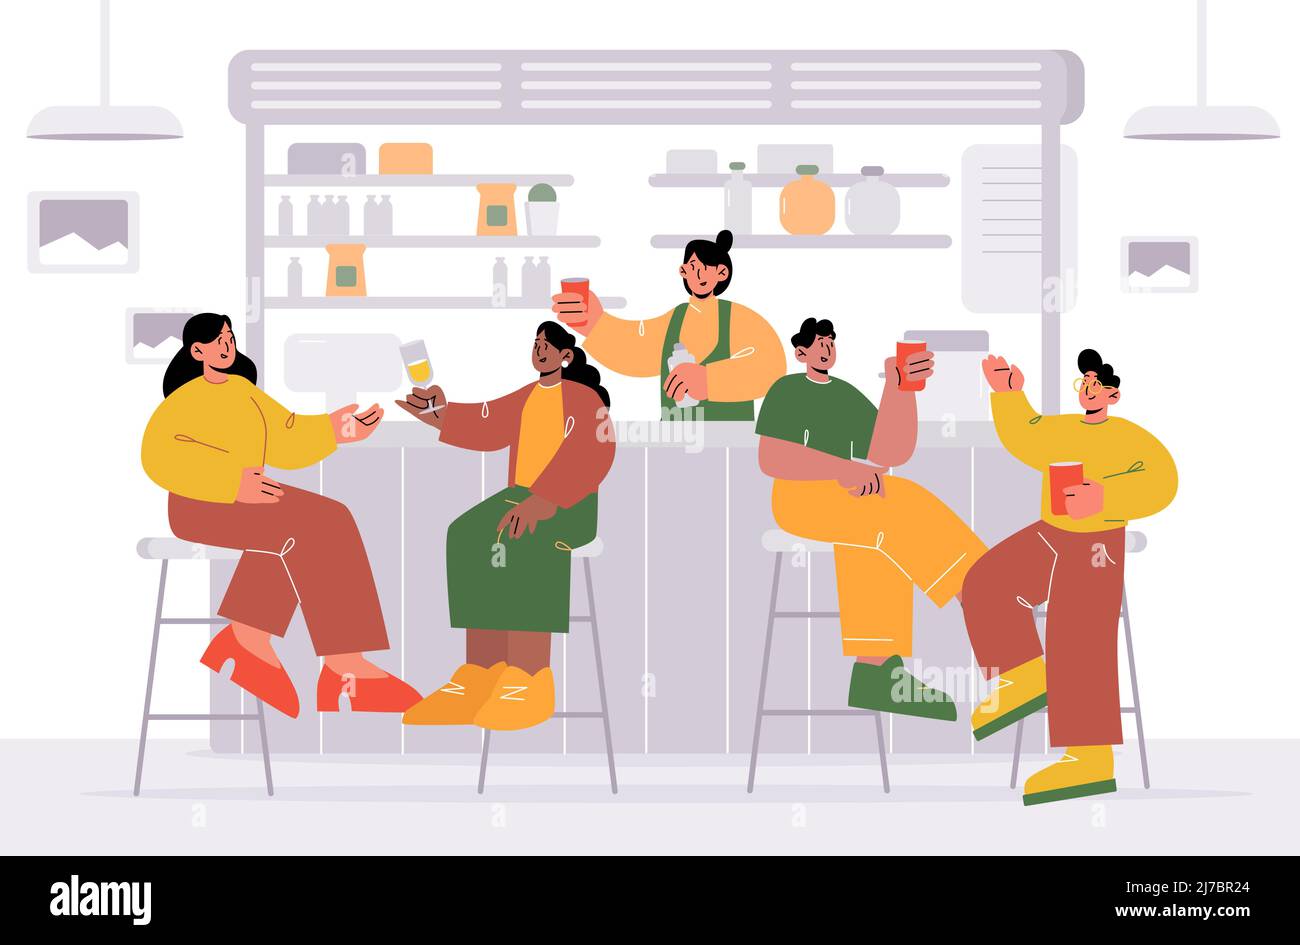 Diverse people sitting on stools in bar or pub. Vector flat illustration of cafe or restaurant interior with bar counter, shelves with bottles, happy Stock Vector